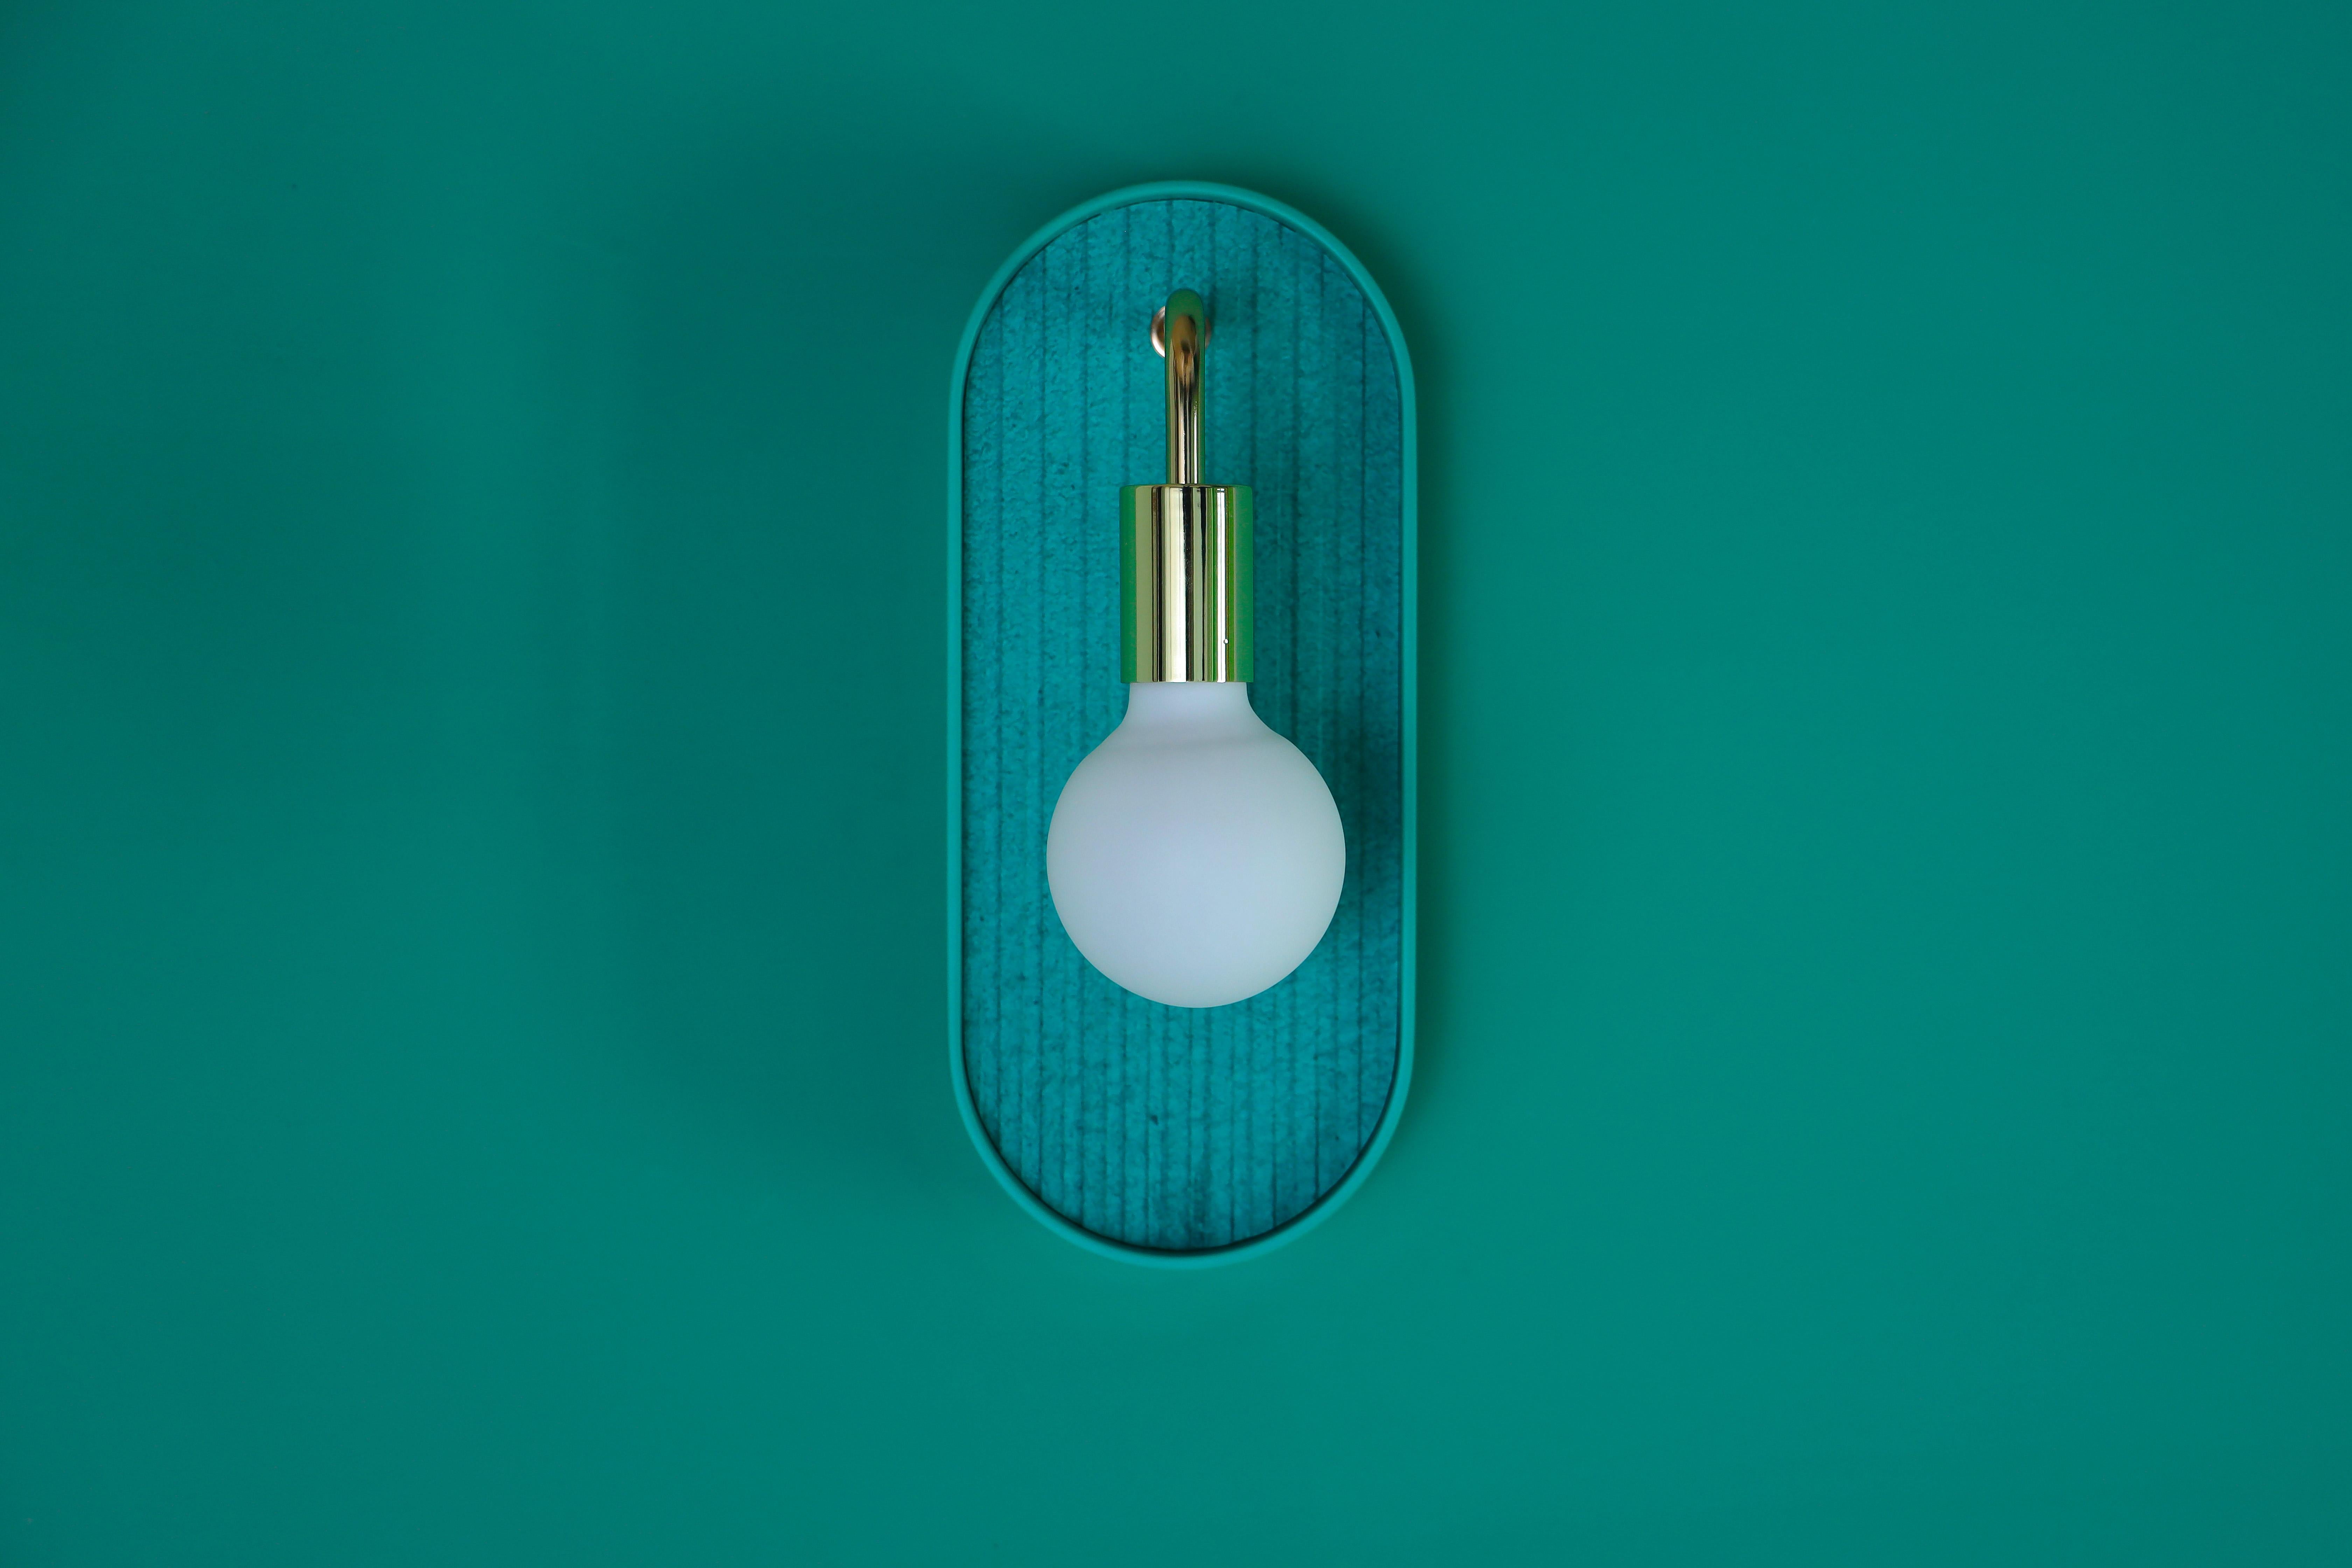 Italian Bracketlamp MiniOblong green - green lacquered solid basswood and paper in Stock For Sale